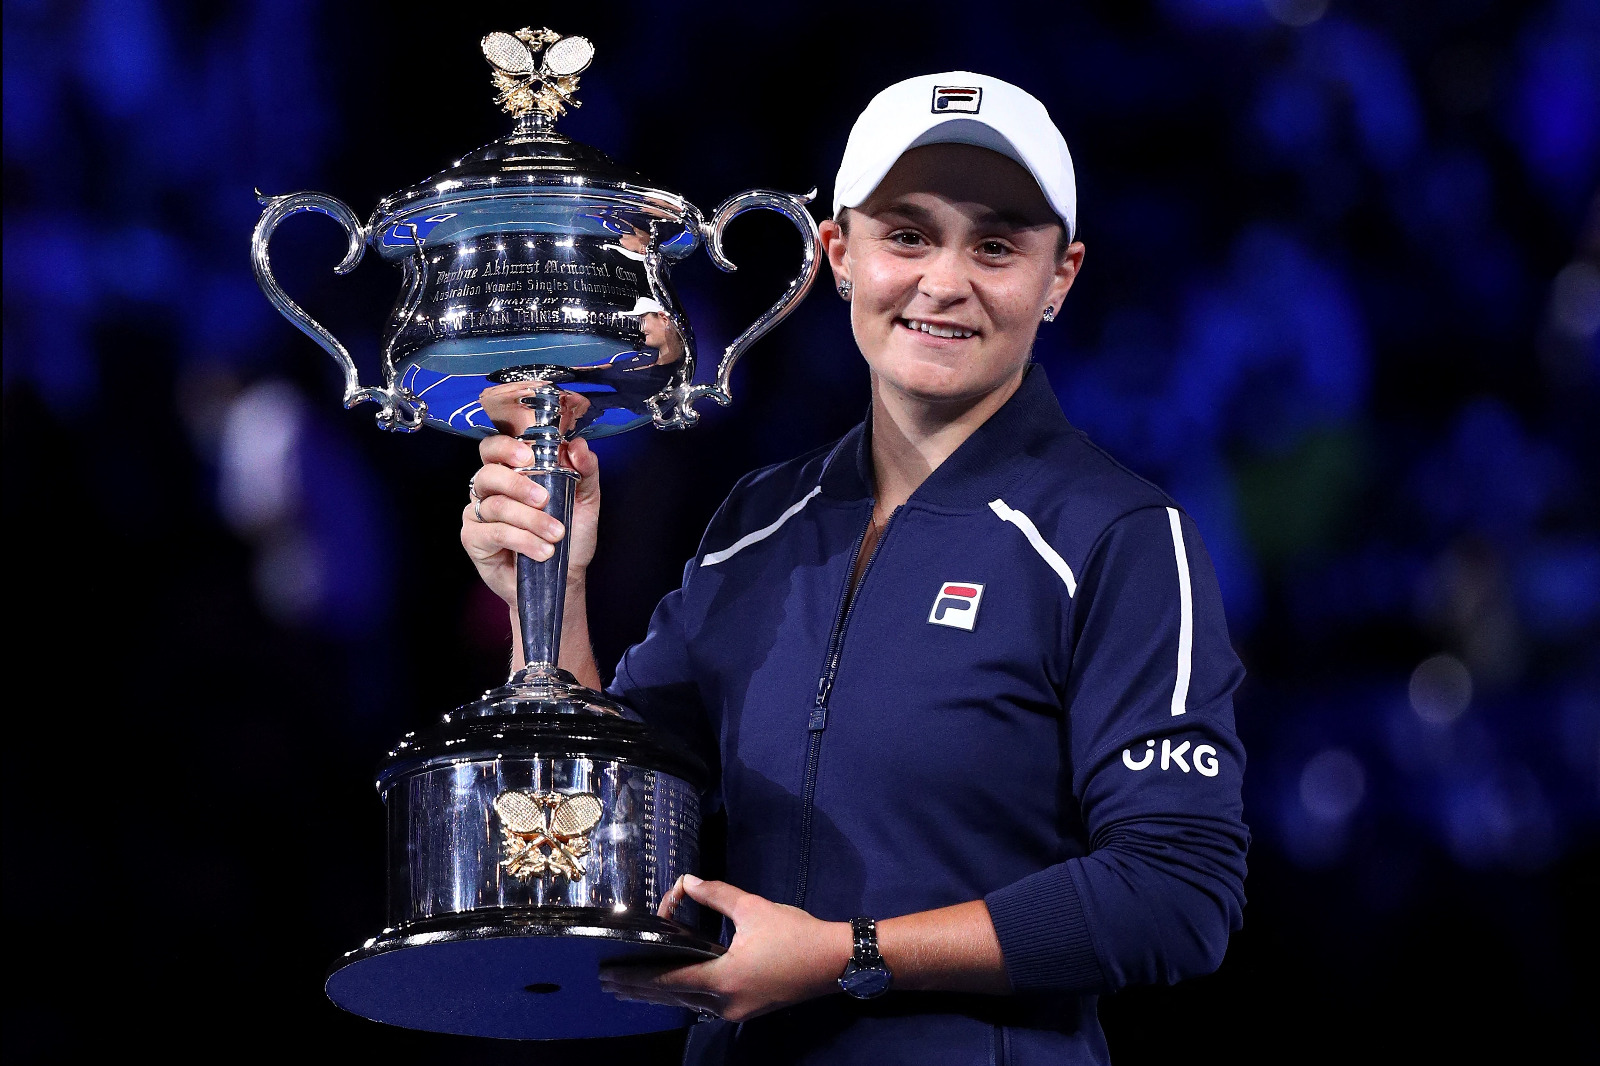 MELBOURNE: Australia's Ashleigh Barty holds her trophy following her victory in the women's singles final match against Danielle Collins of the US on day thirteen of the Australian Open tennis tournament in Melbourne on January 29, 2022. – AFP